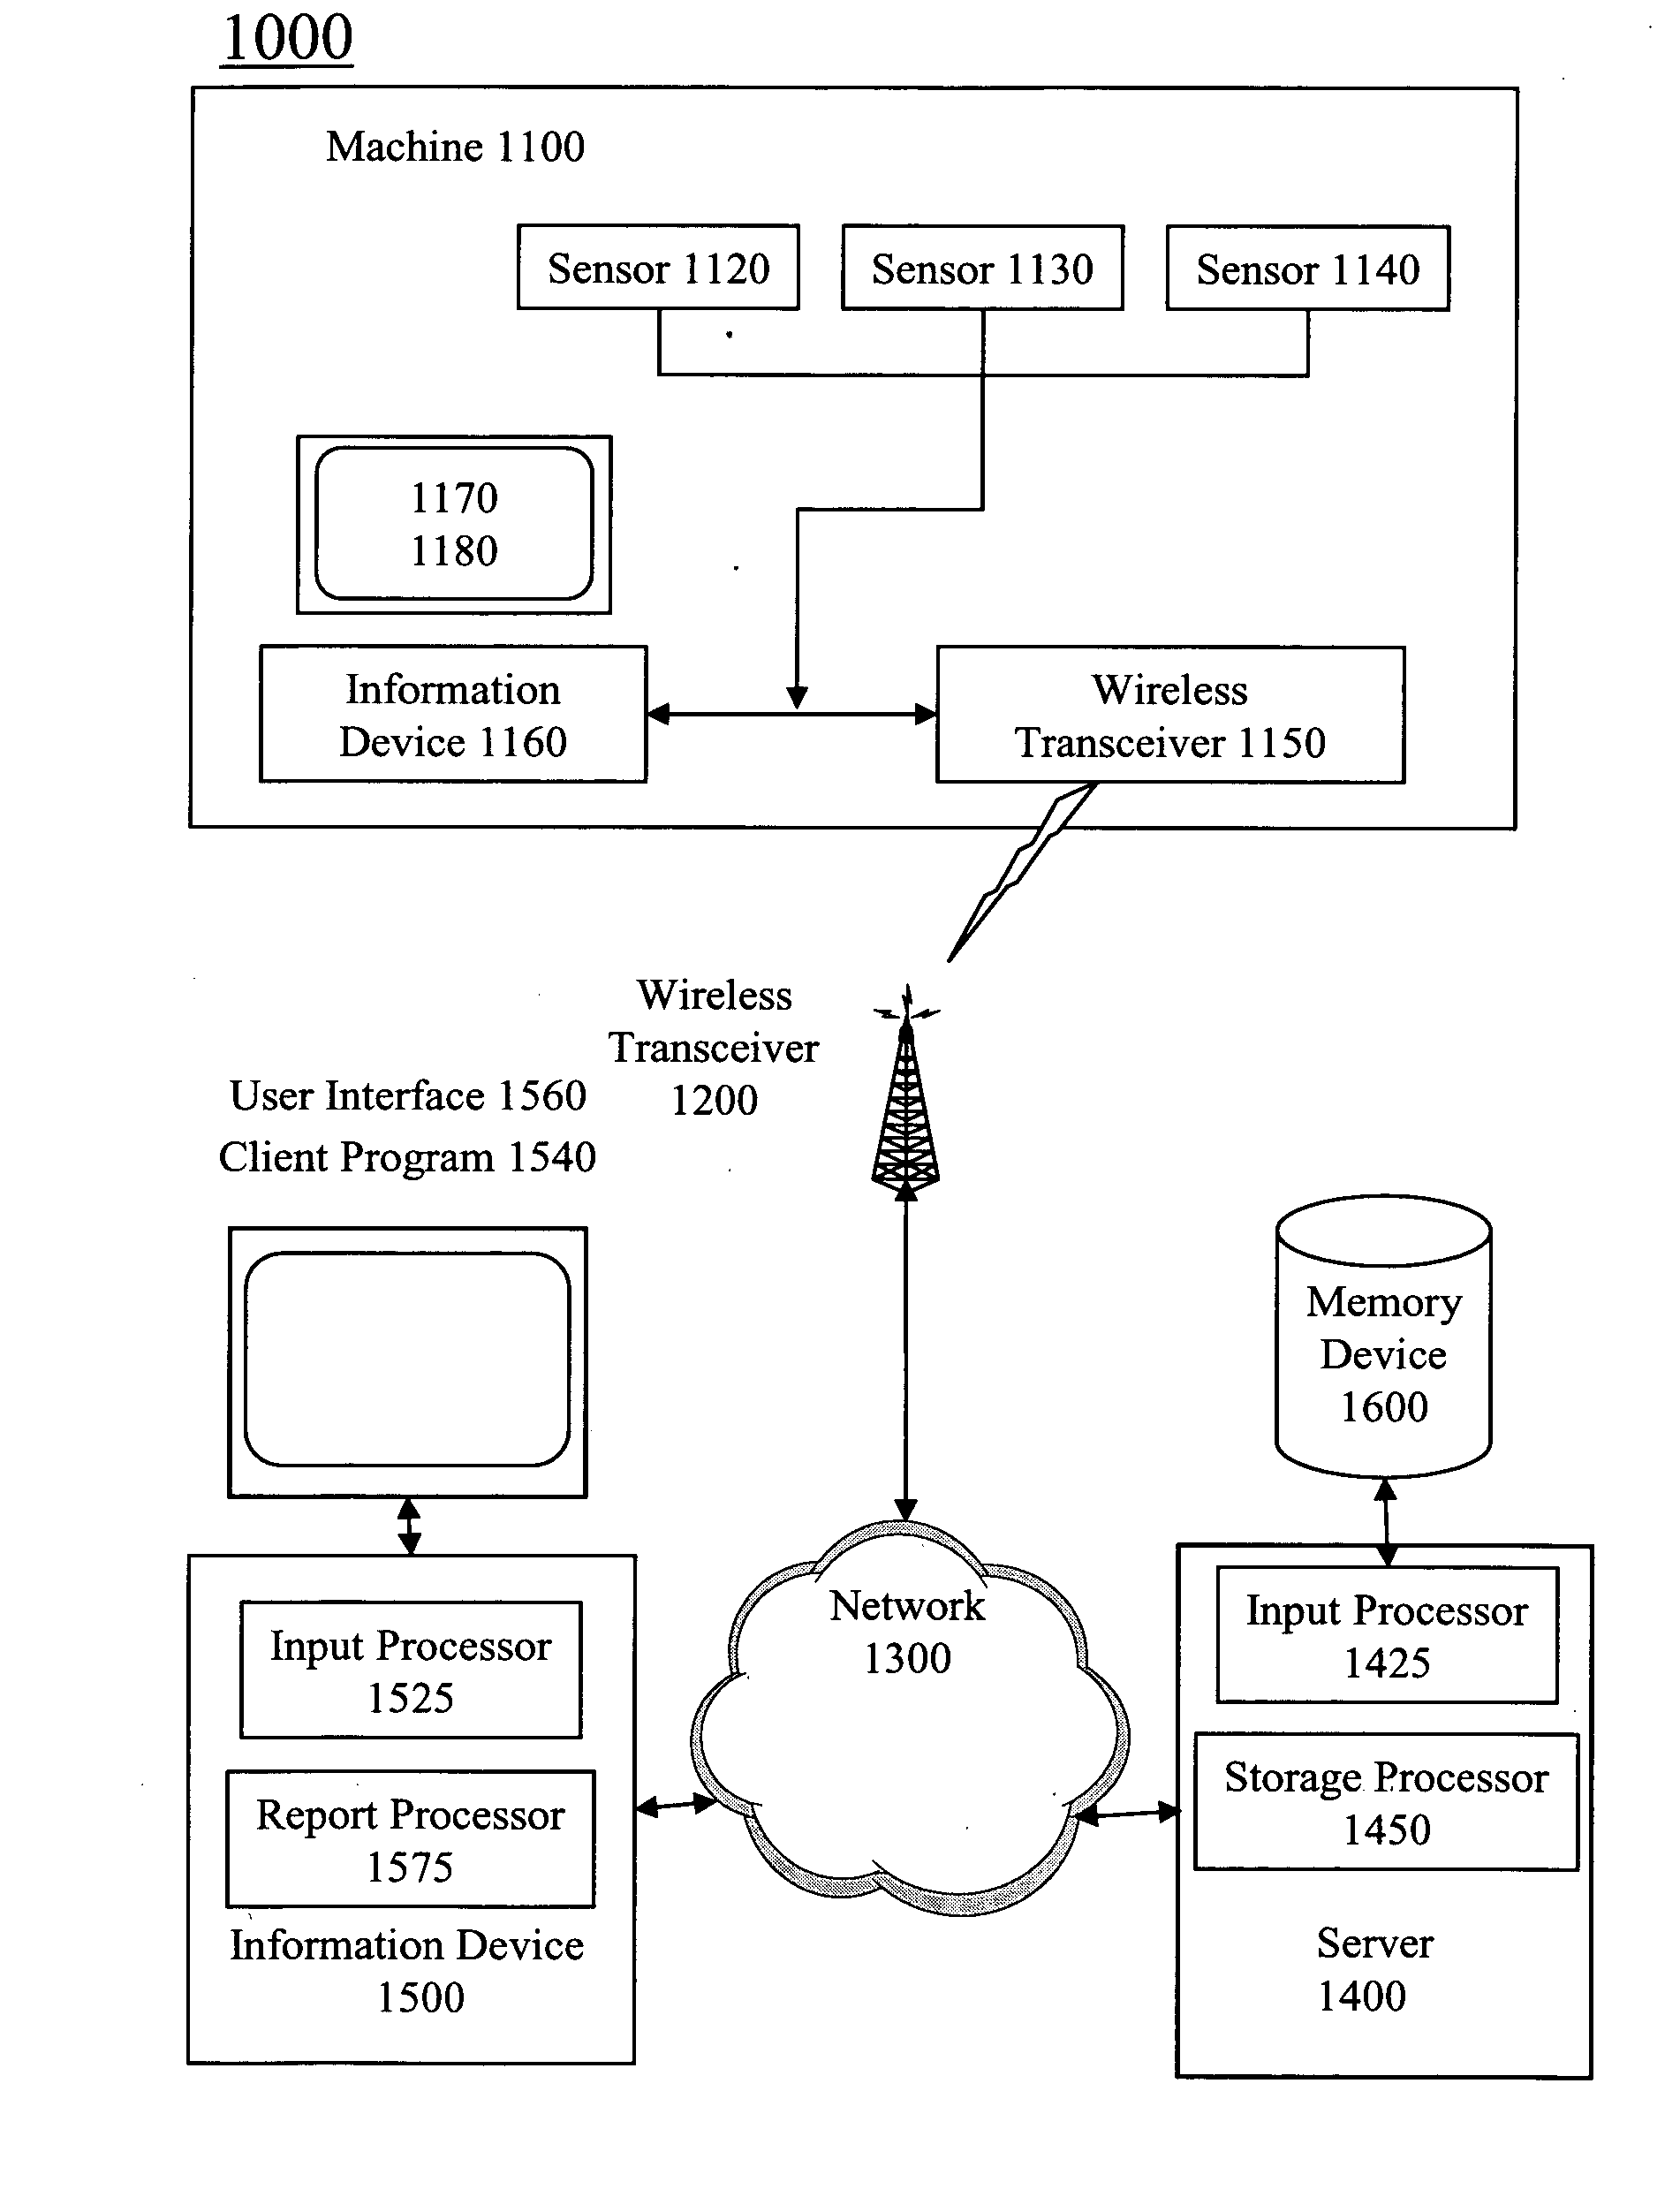 System and method for remotely obtaining and managing machine data